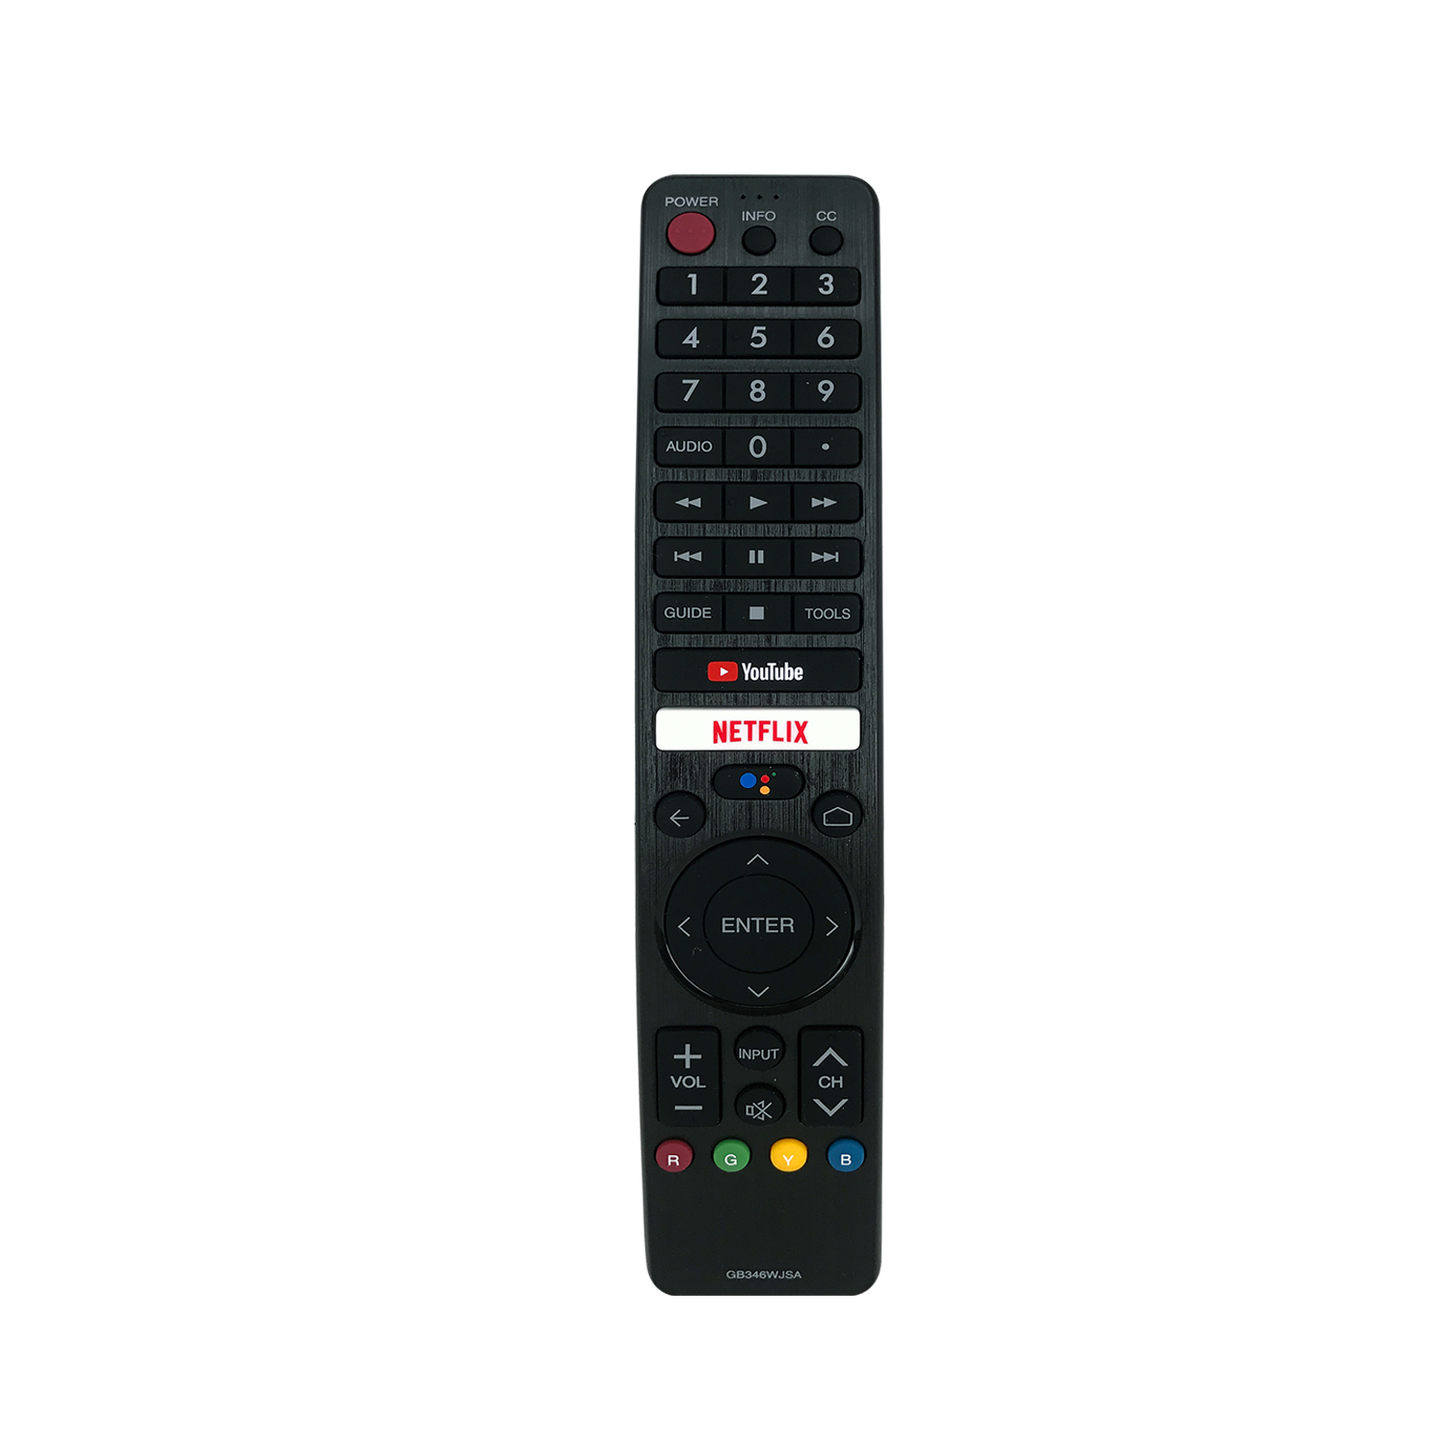 BT-GB346 Remote Control for Sharp AQUOS TV, GB346WJSA Replacement